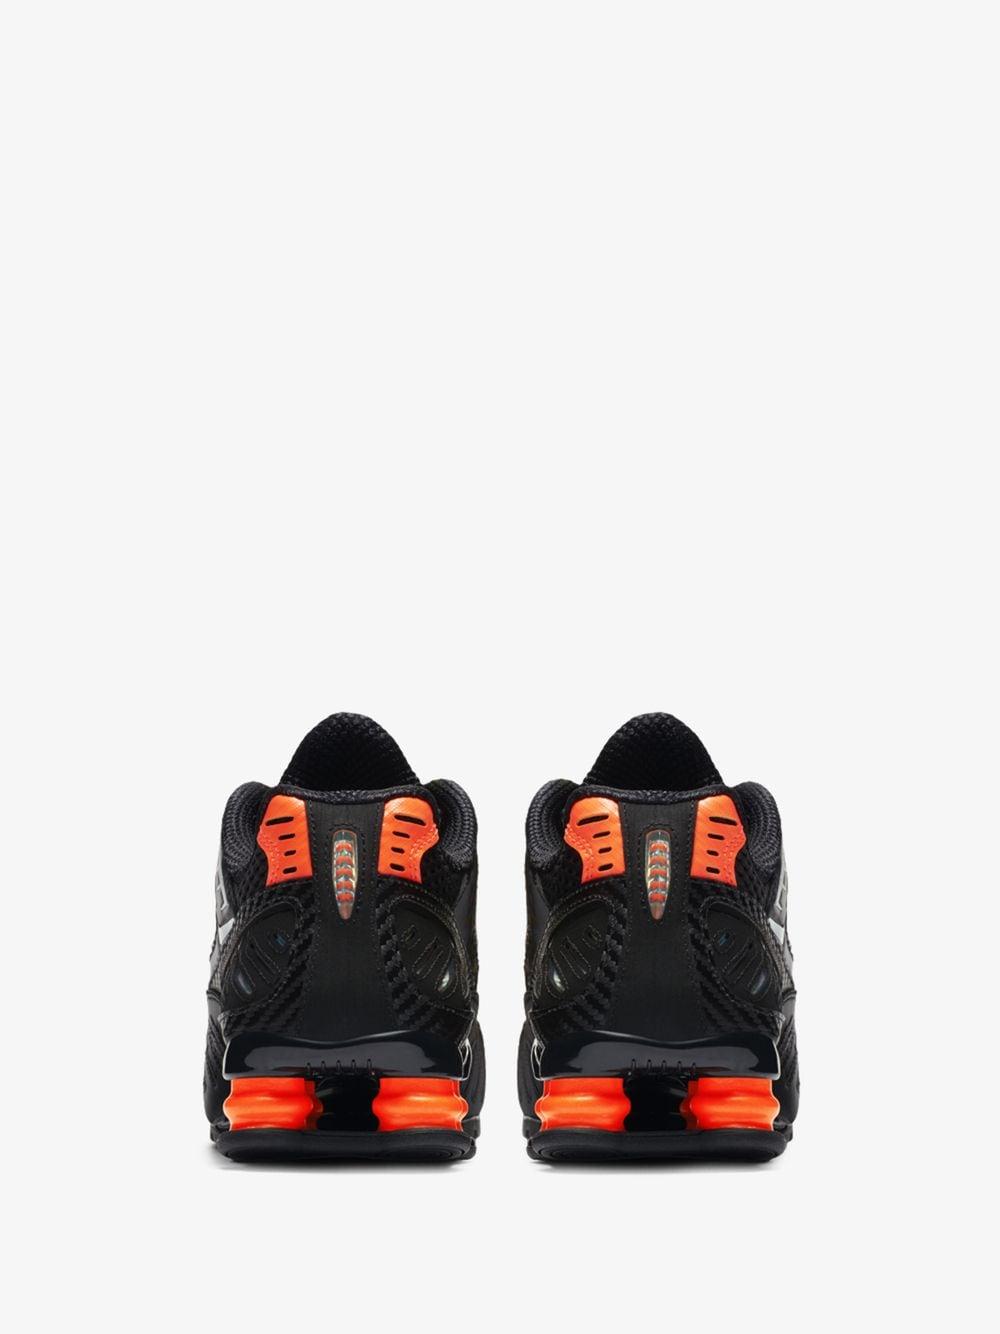 Nike Black And Orange Shox Enigma Sneakers for Men - Lyst